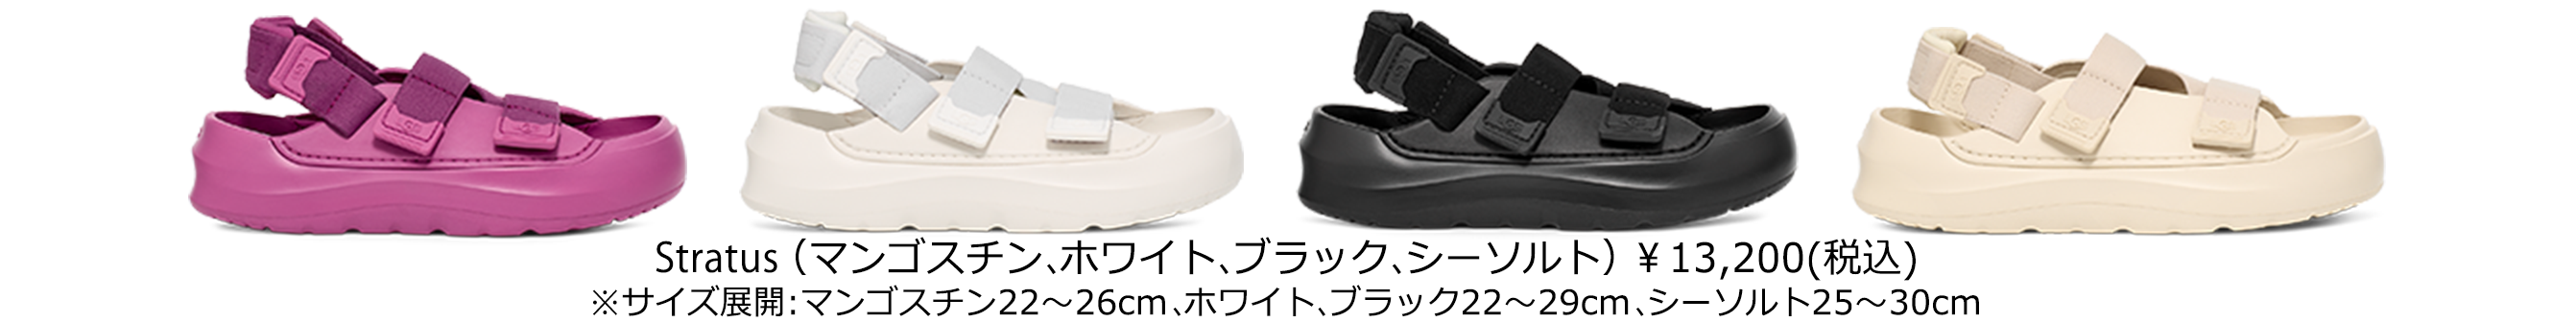 UGG、『NewJeans Fan Meeting 'Bunnies Camp 2024 Tokyo Dome’』 を祝して、東京ドームシティ大型ビジョンと...